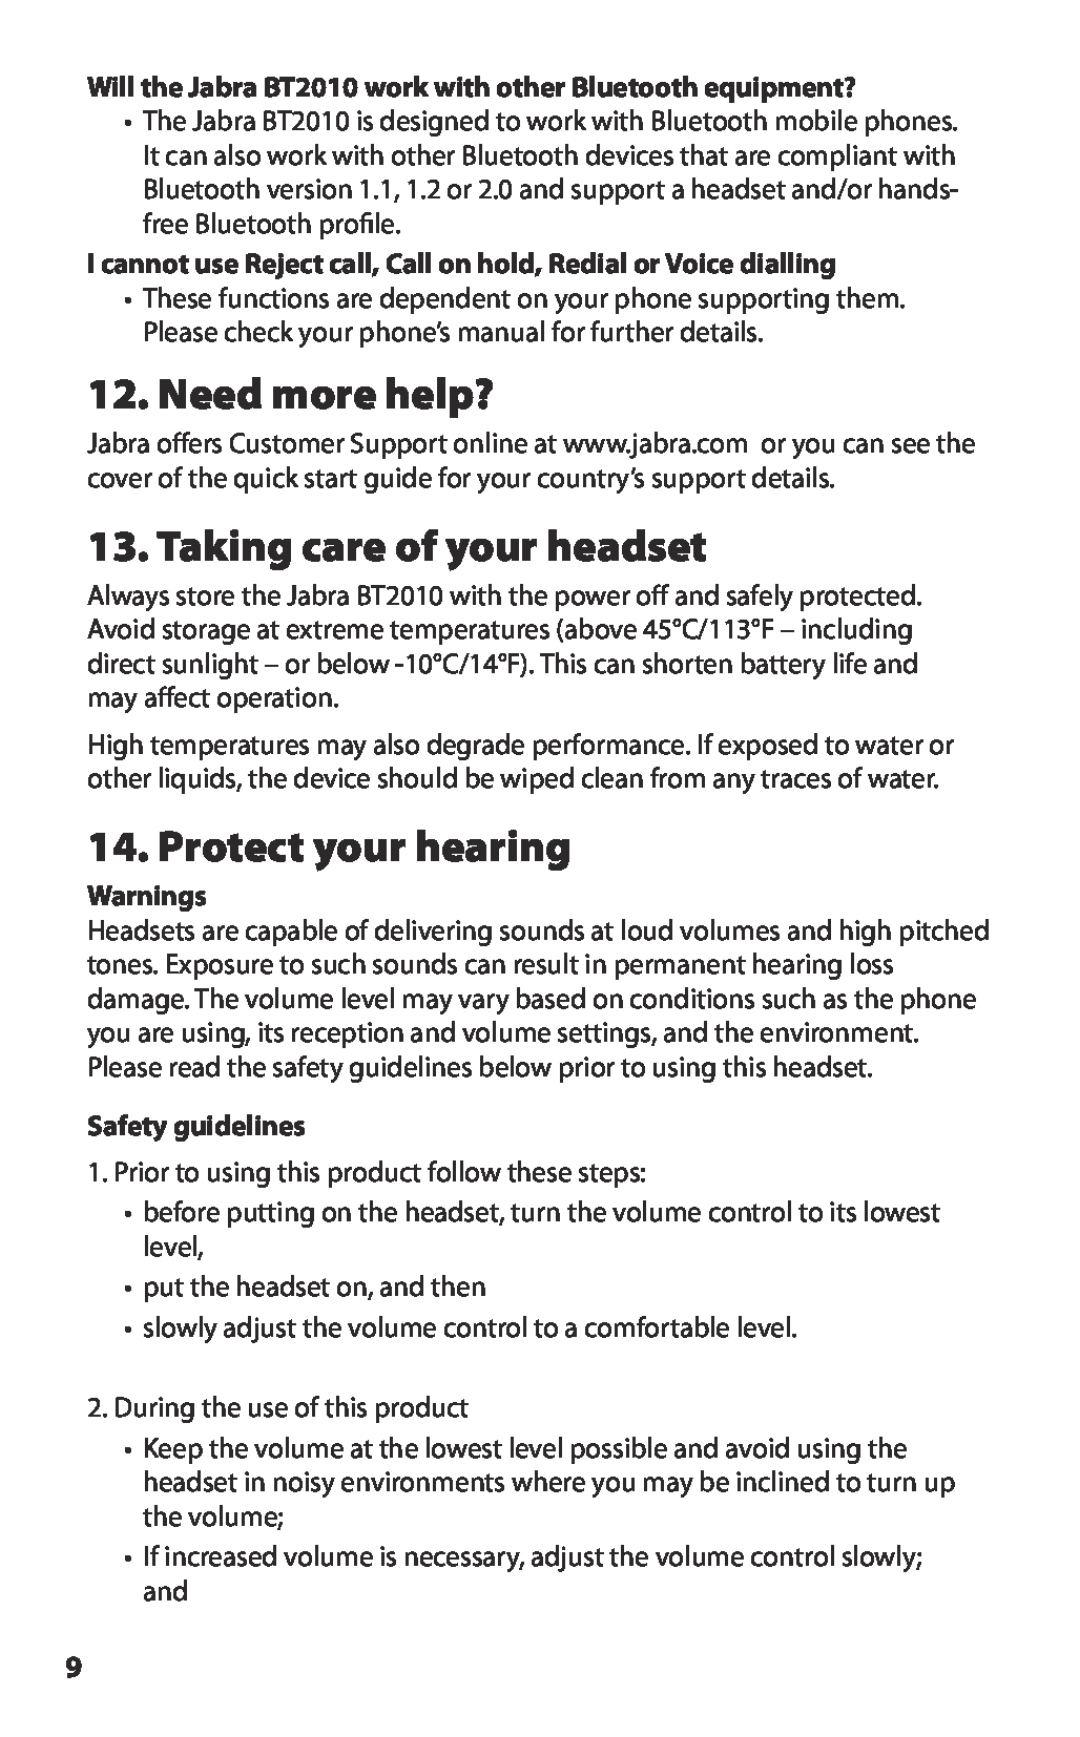 Lennox Hearth BT2010 manual Need more help?, Taking care of your headset, Protect your hearing, Warnings, Safety guidelines 